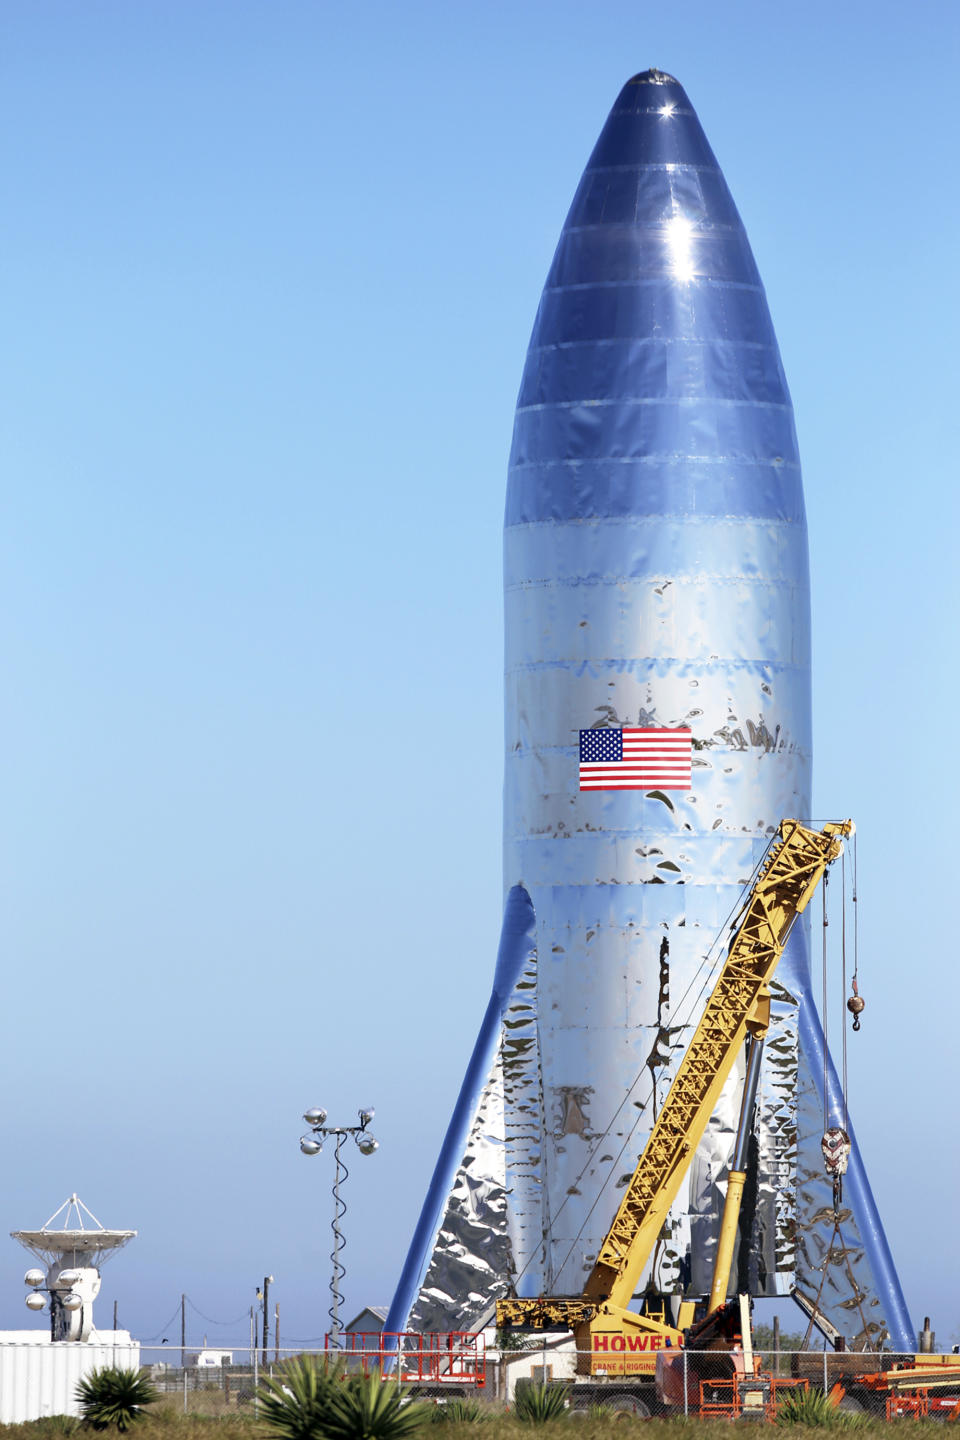 FILE - In this Jan. 12, 2019 file photo, the SpaceX prototype Starship hopper stands at the Boca Chica Beach site in Texas. Jeff Bezos has lost his appeal of NASA's contract with Elon Musk's SpaceX to build its new moon lander. The Government Accountability Office Friday, July 30, 2021 ruled that NASA's award of the $2.9 billion contract to just SpaceX was legal and proper. (Miguel Roberts/The Brownsville Herald via AP, File)